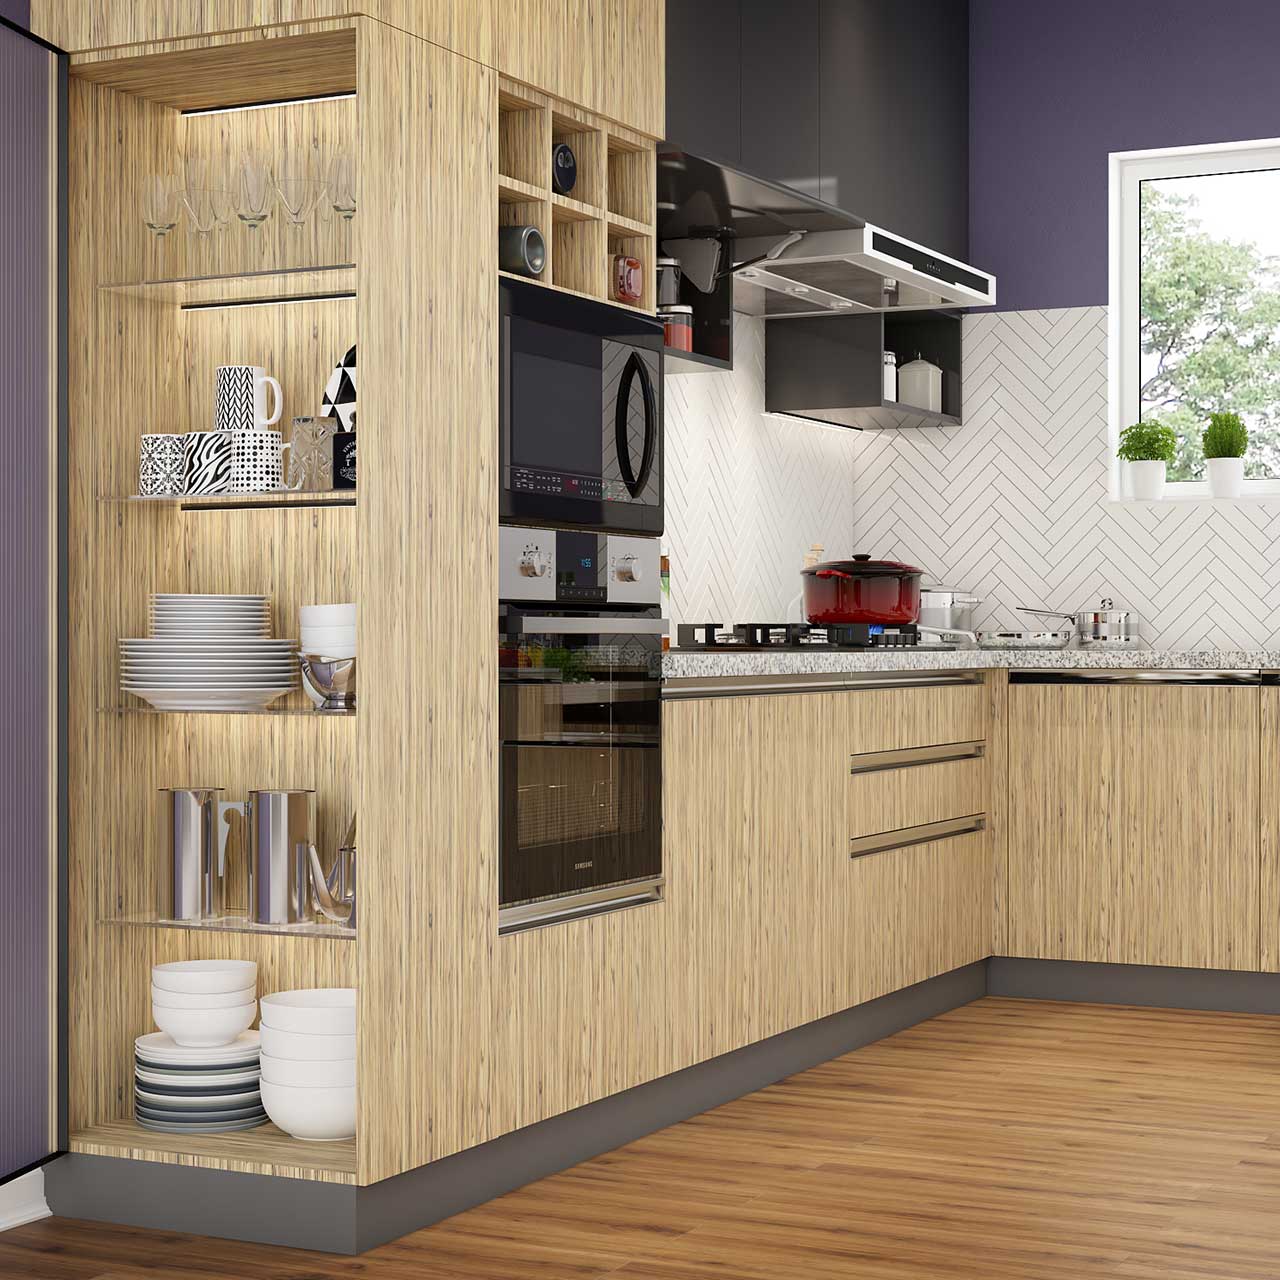 Tall Units for enhancing the storage space in your Modular Kitchen.